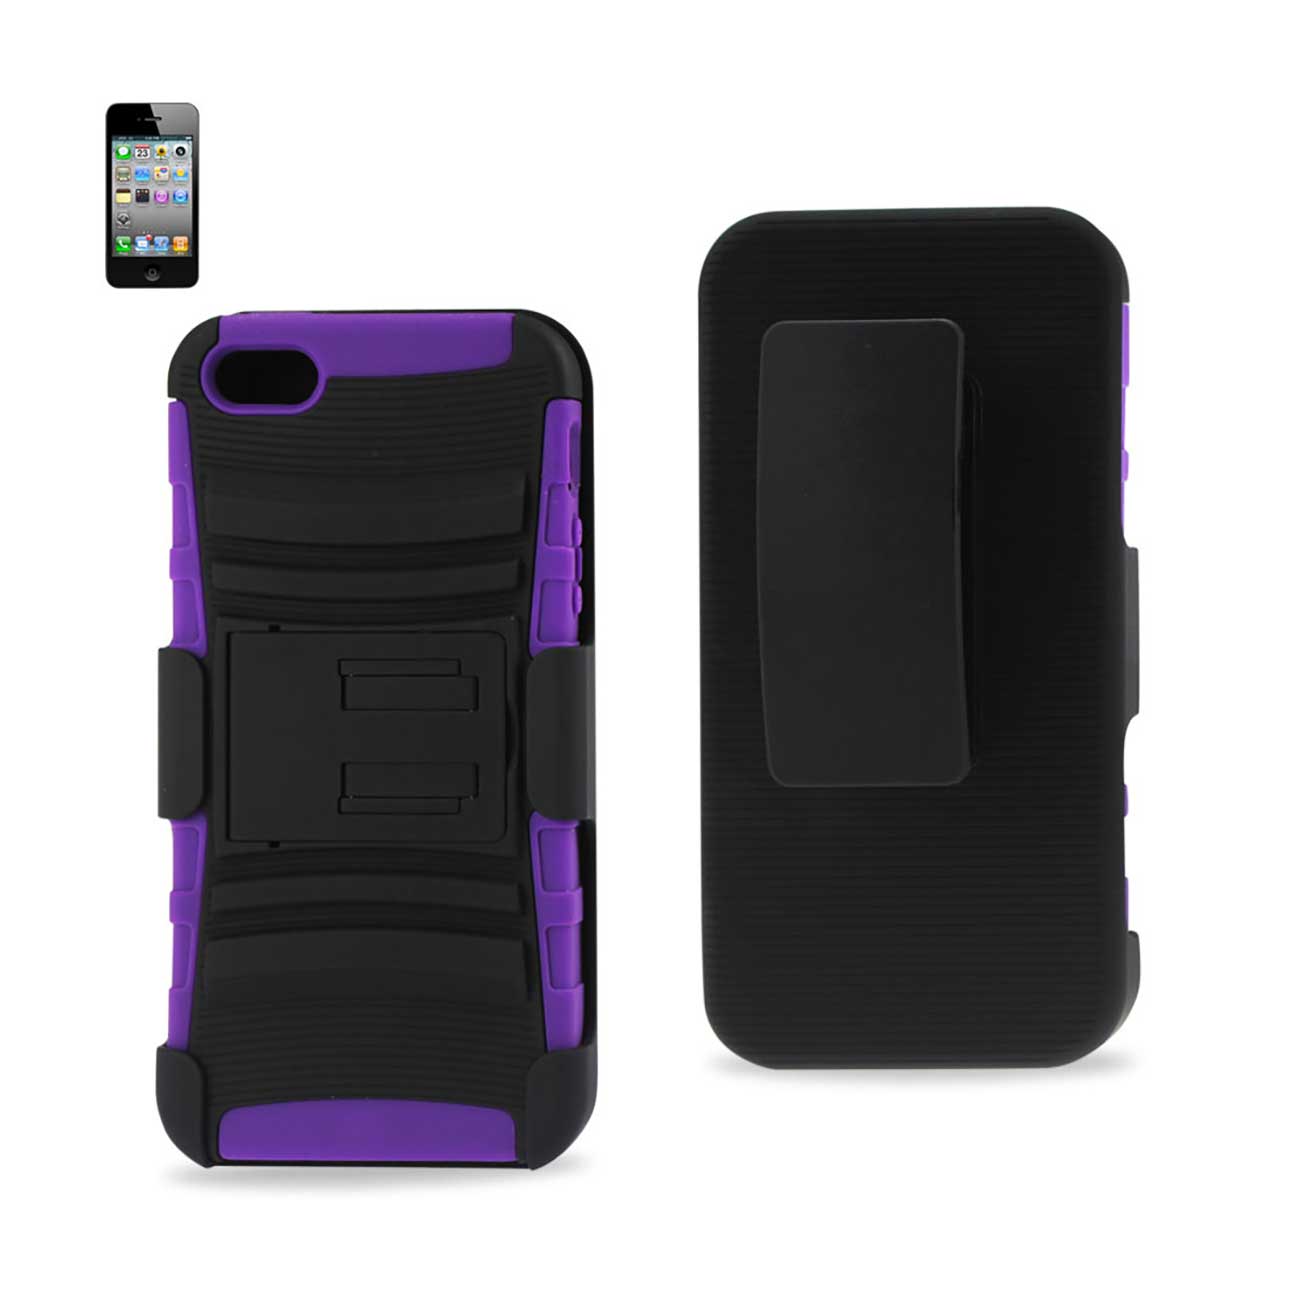 iPhone 5/5S/Se Hybrid Heavy Duty Holster Combo Case With Non Slip Grip In Black Purple